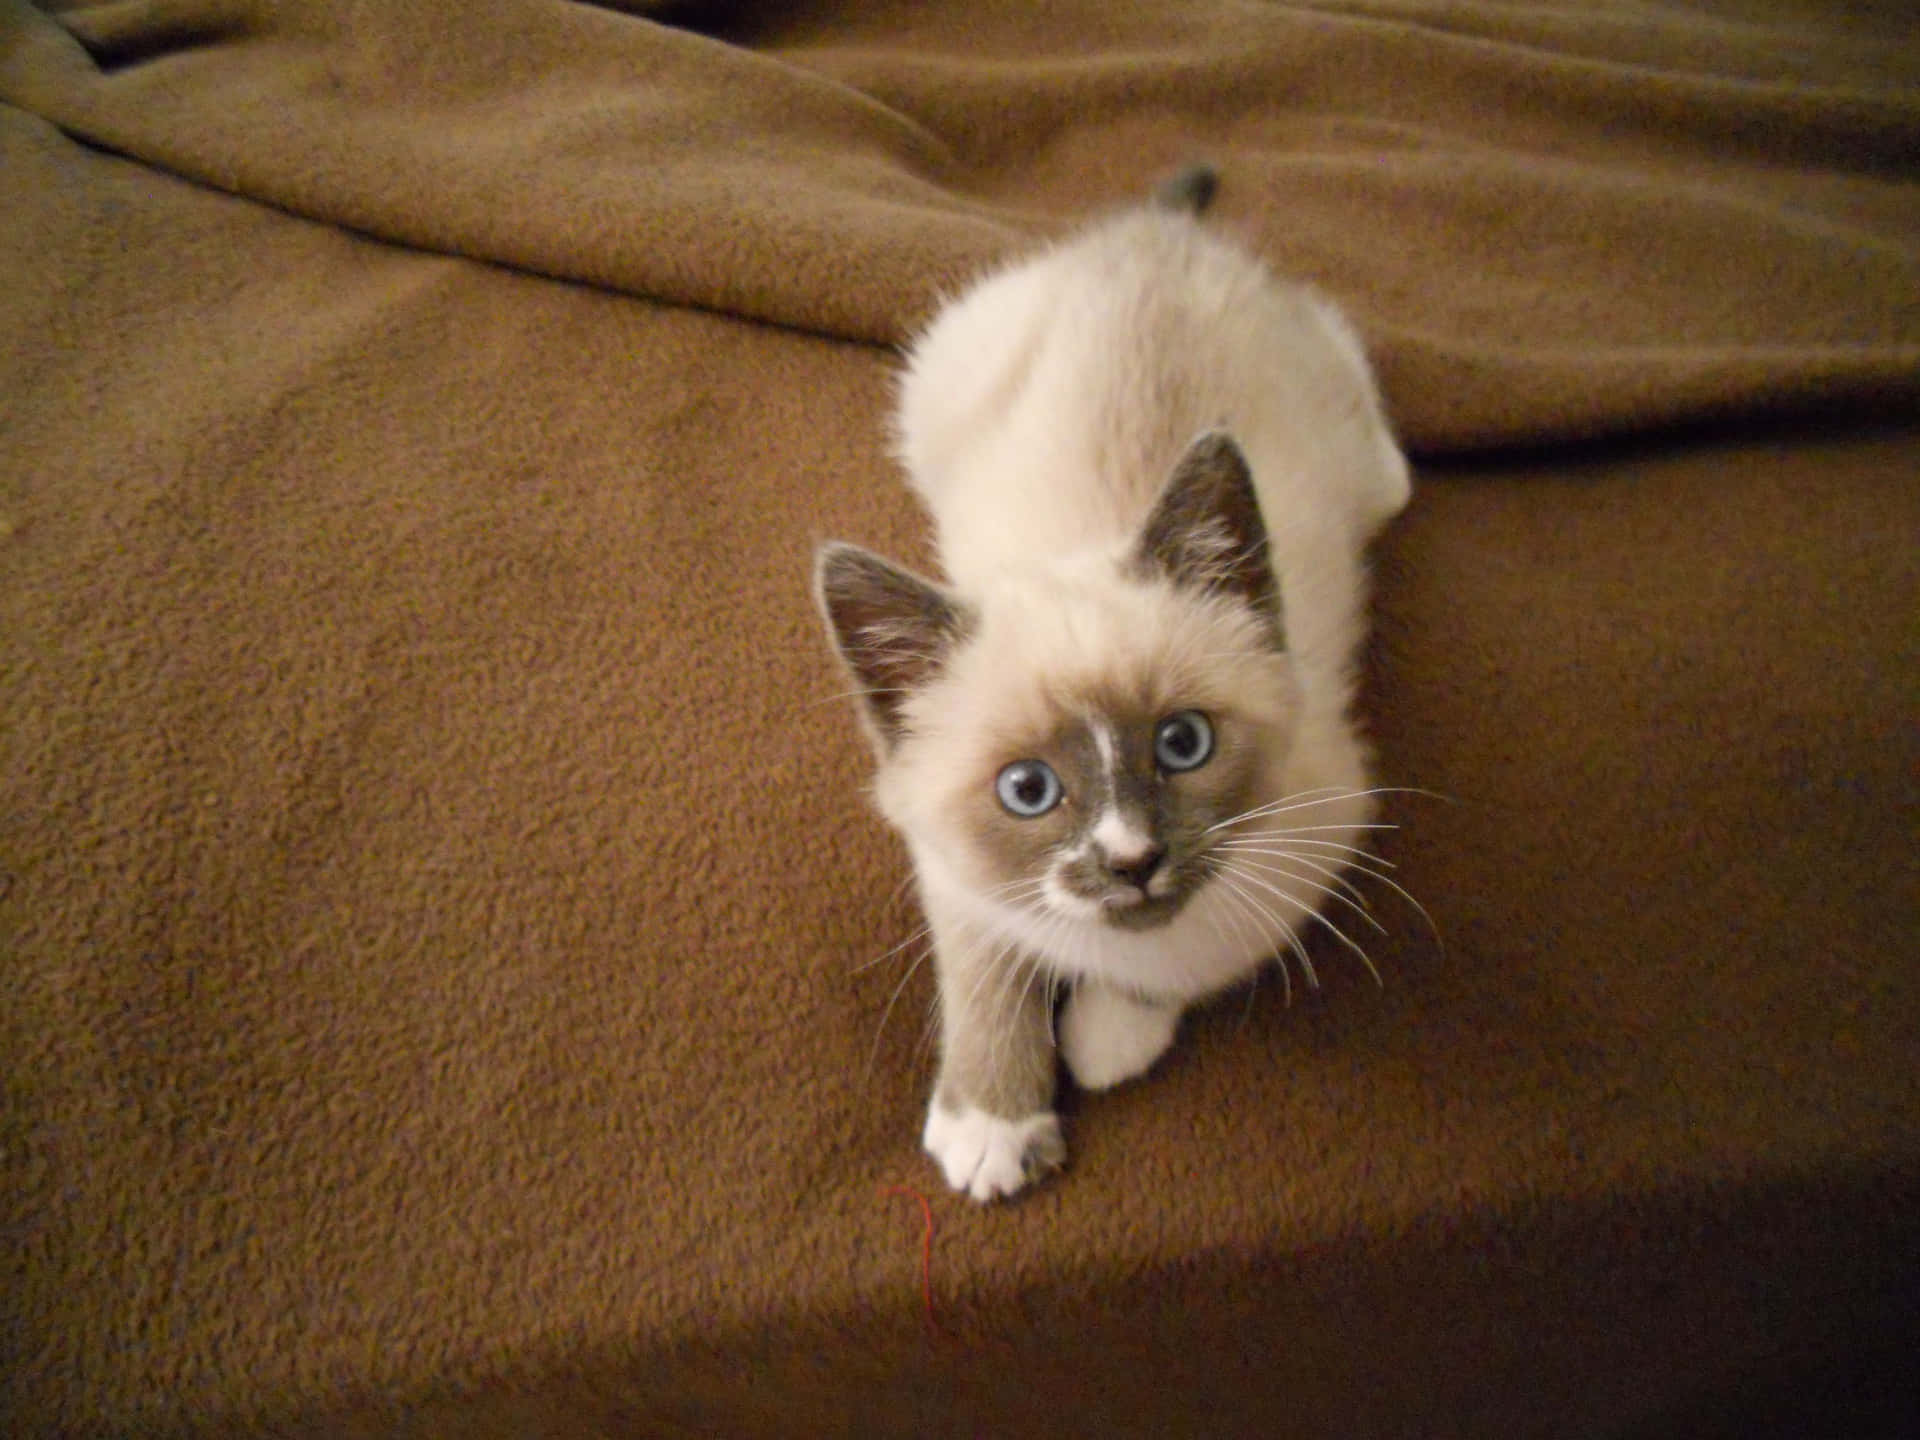 A beautiful Snowshoe Cat with striking blue eyes sitting gracefully on the floor. Wallpaper